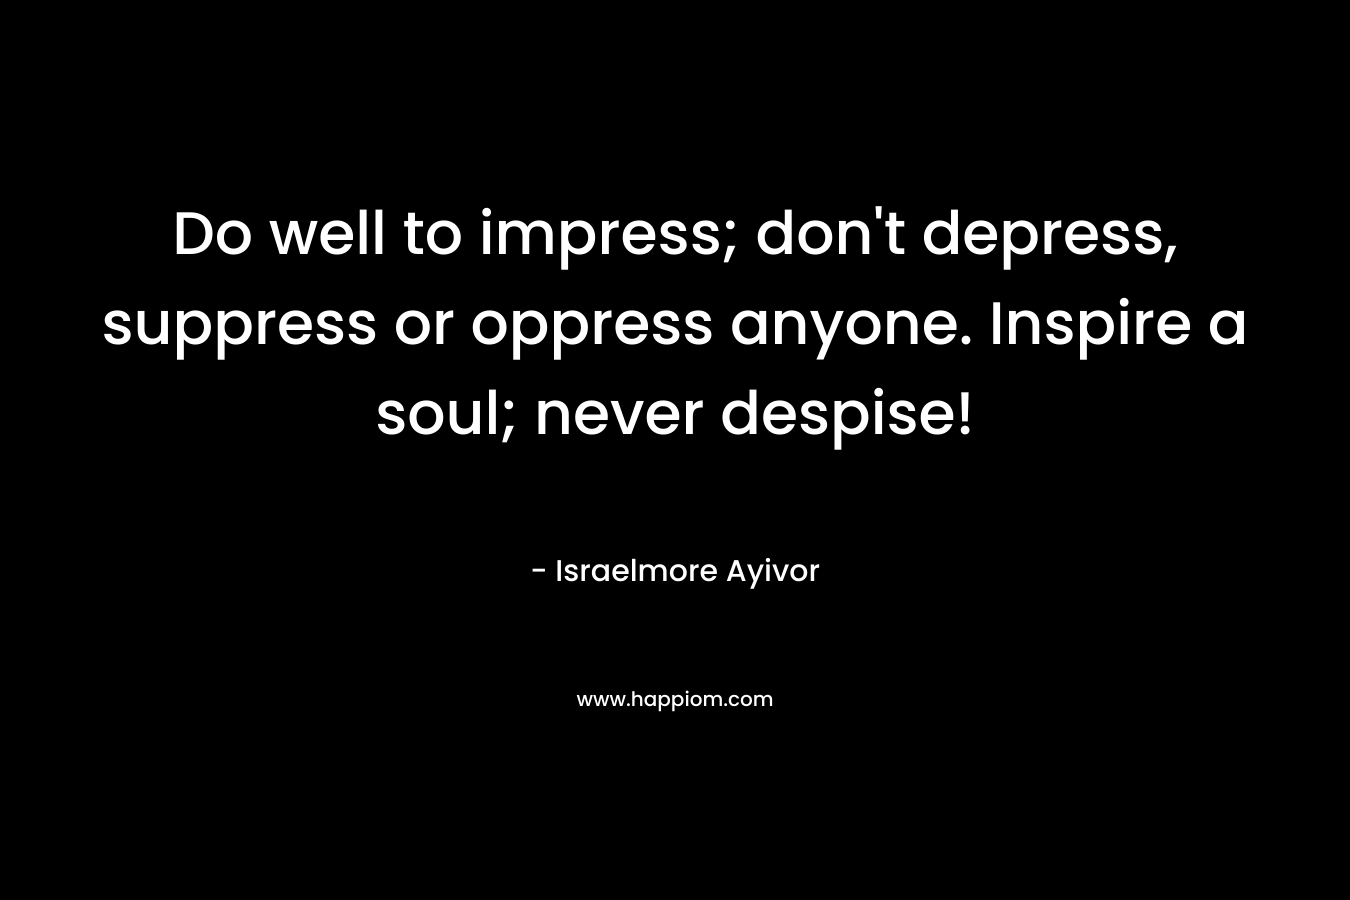 Do well to impress; don't depress, suppress or oppress anyone. Inspire a soul; never despise!